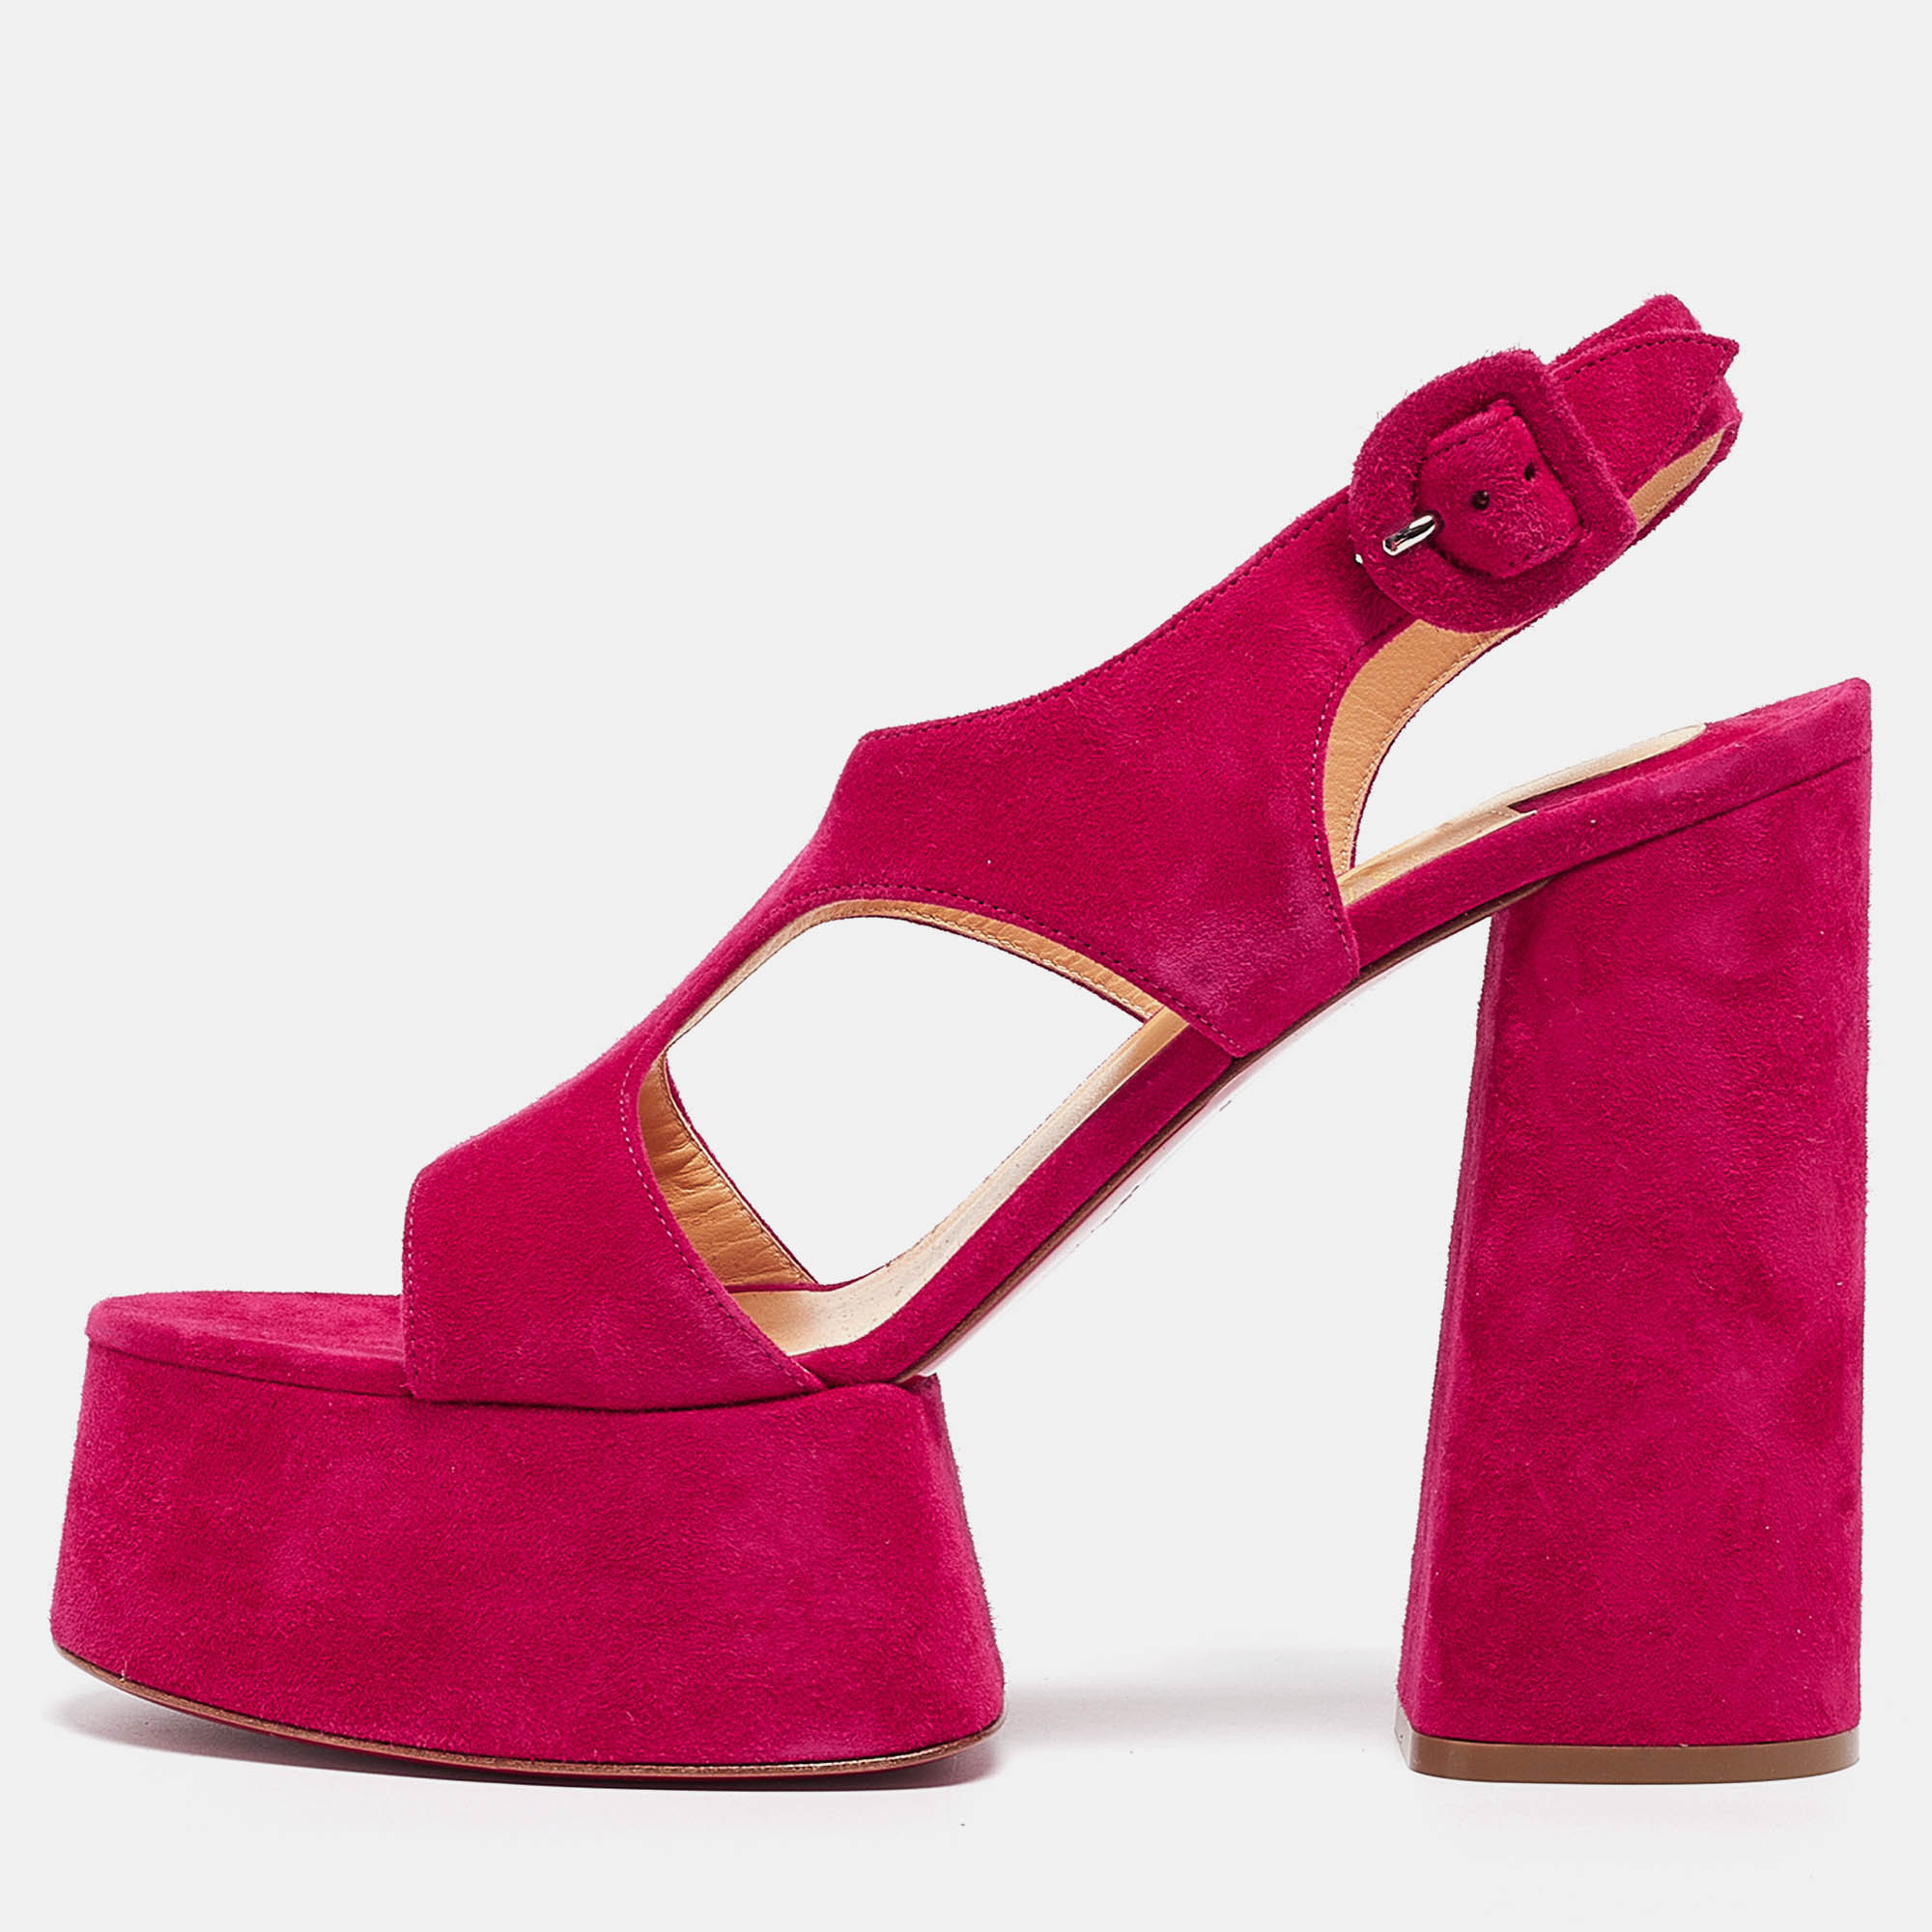 Pre-owned Christian Louboutin Pink Suede Foolish Sandals Size 40